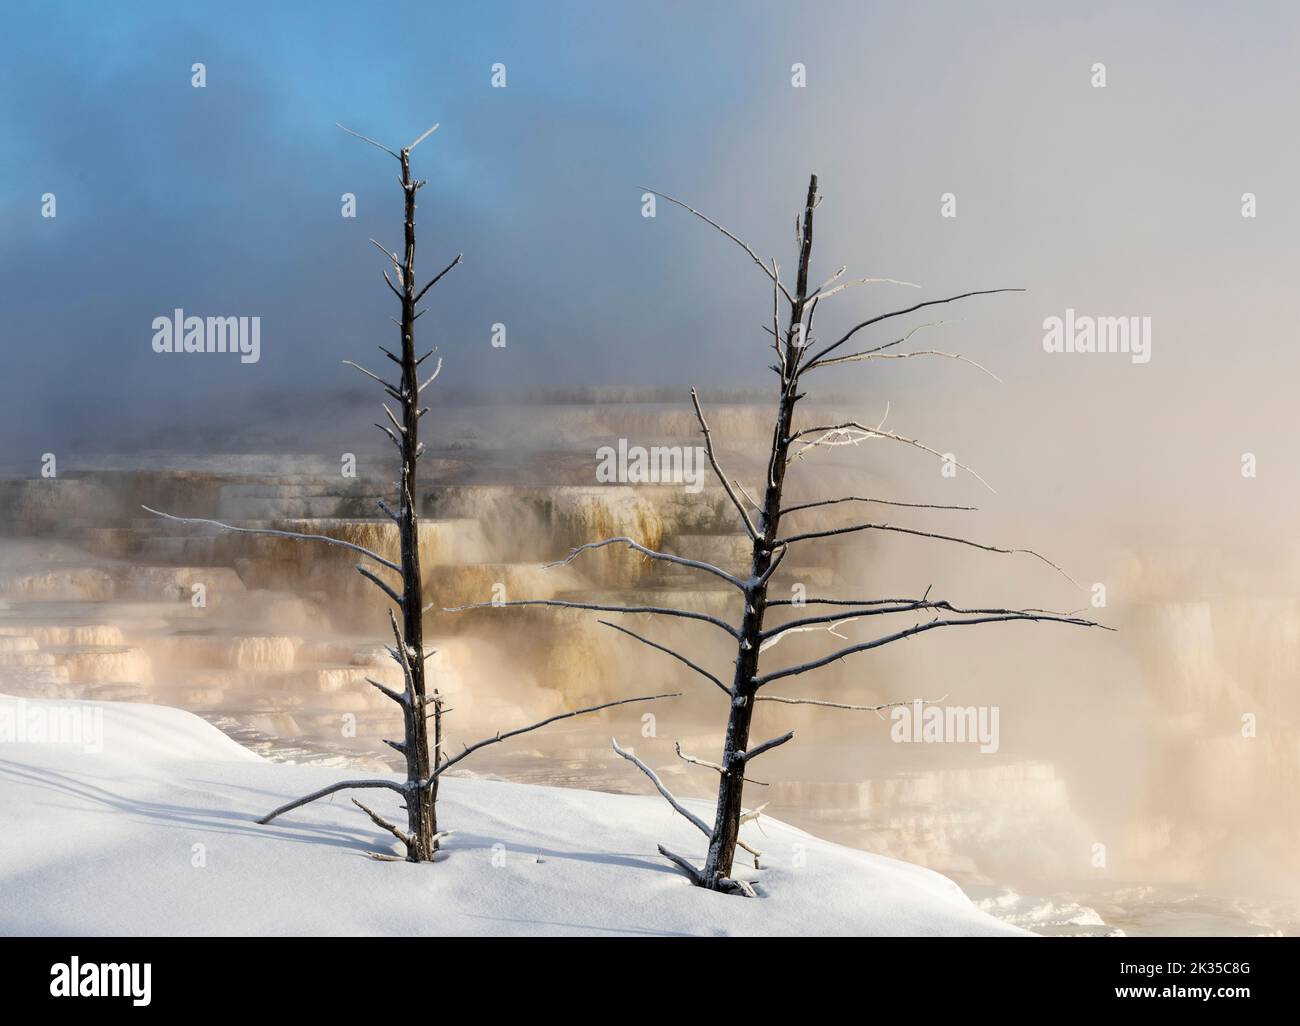 WY05082-00.....WYOMING - Misty morning at the top of Lower Terraces of Mammoth Hot Springs, Yellowstone National Park. Stock Photo